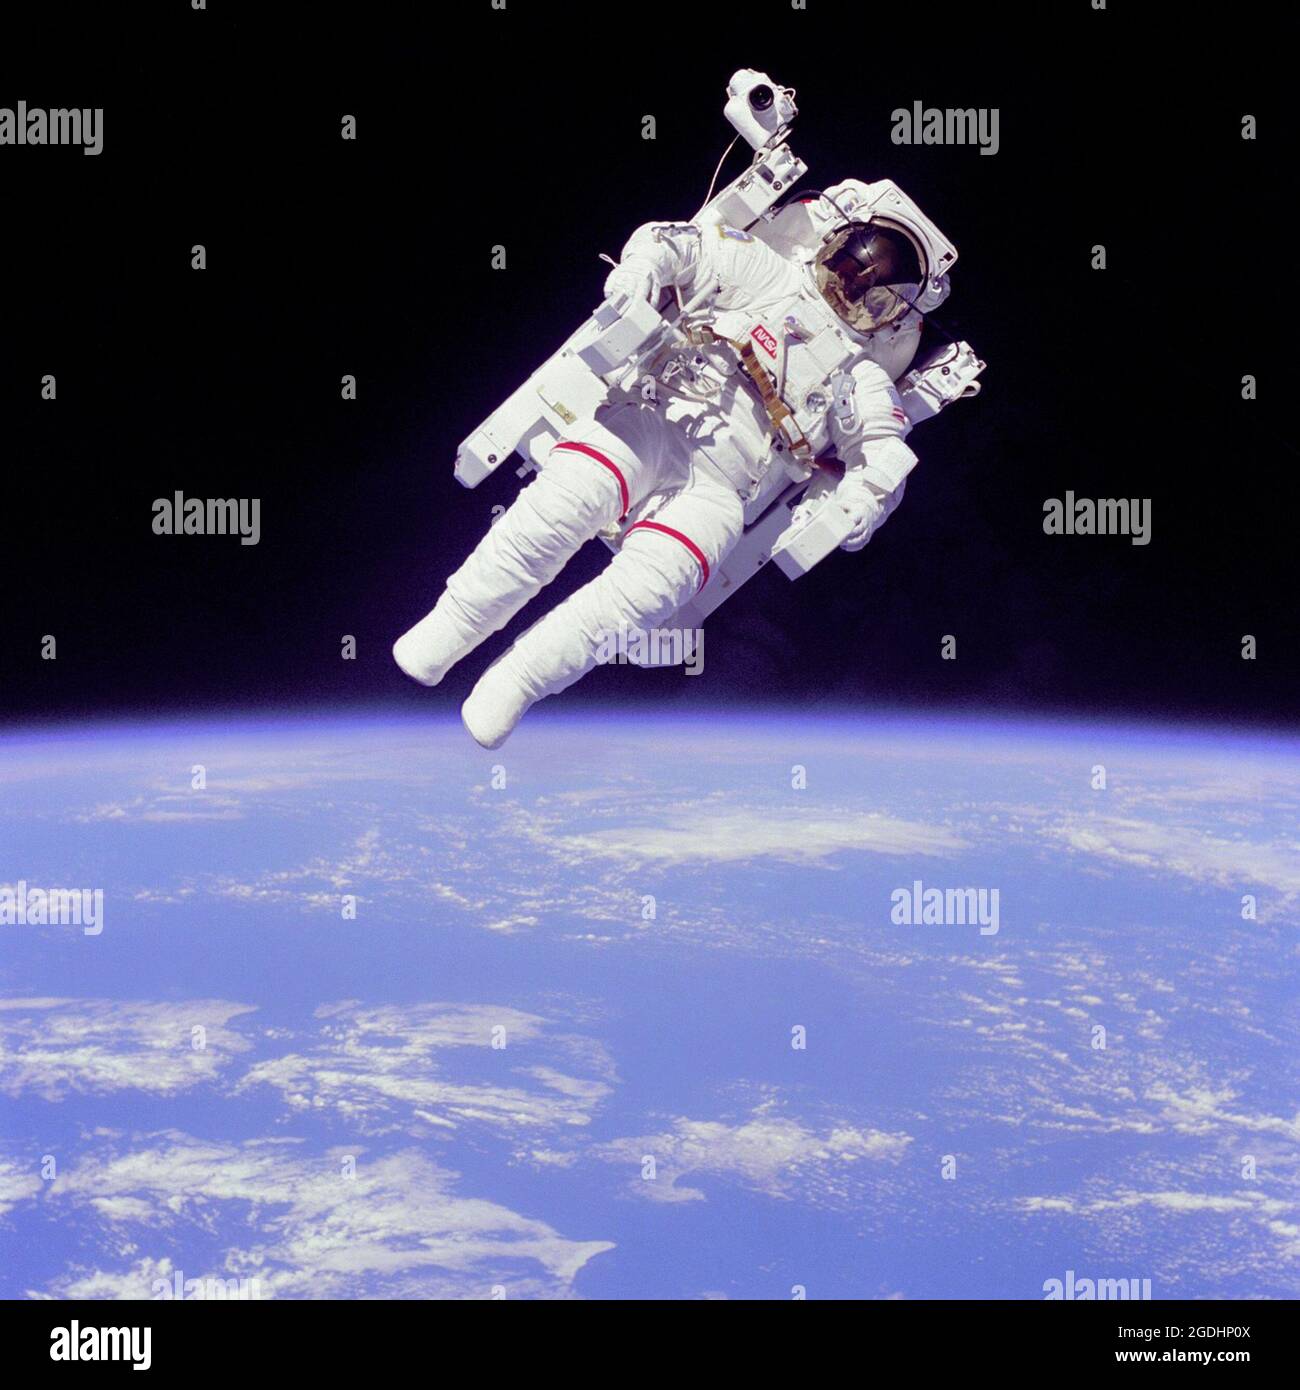 An astronaut flying free from the space shuttle using his jetpack (Manned Manuevering Unit or MMU). Stock Photo